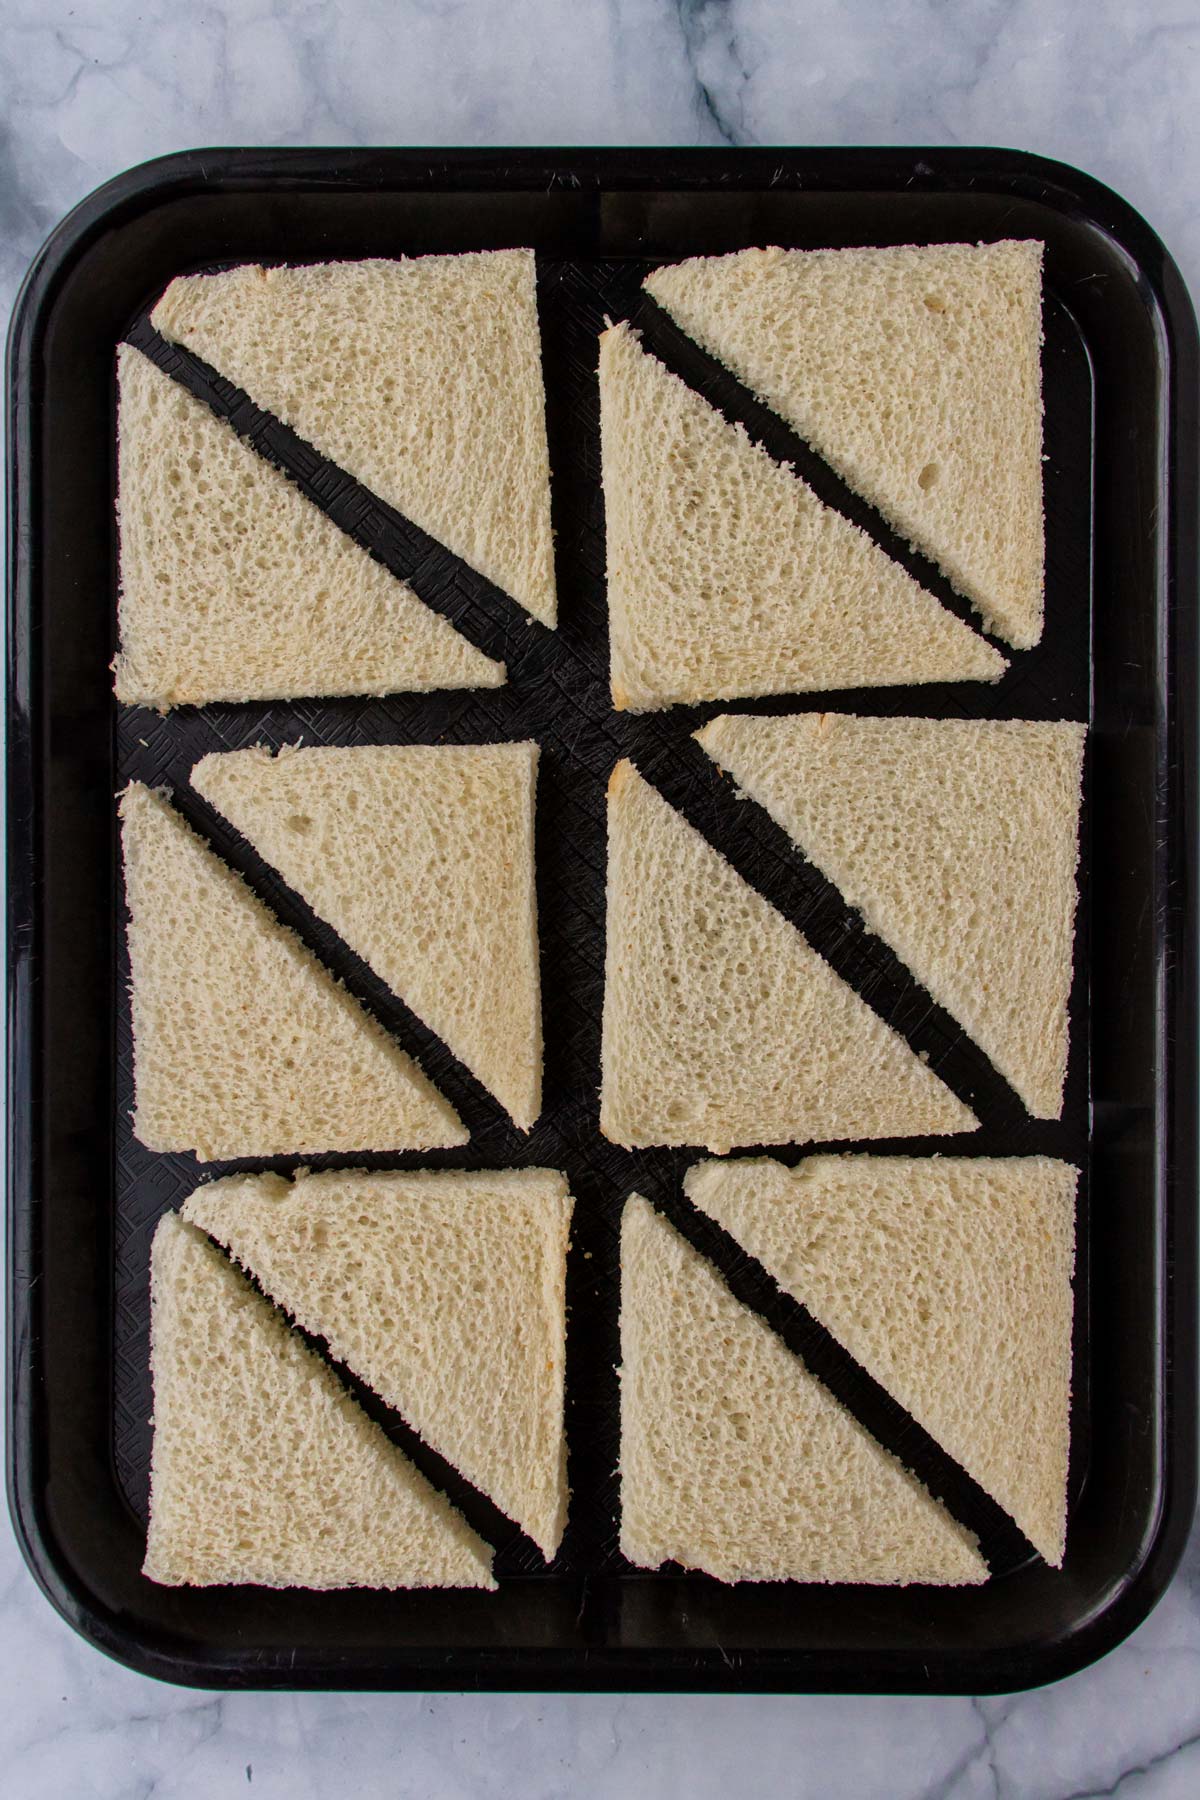 Six slices of white bread with crusts removed, cut in half diagonally on a black tray.